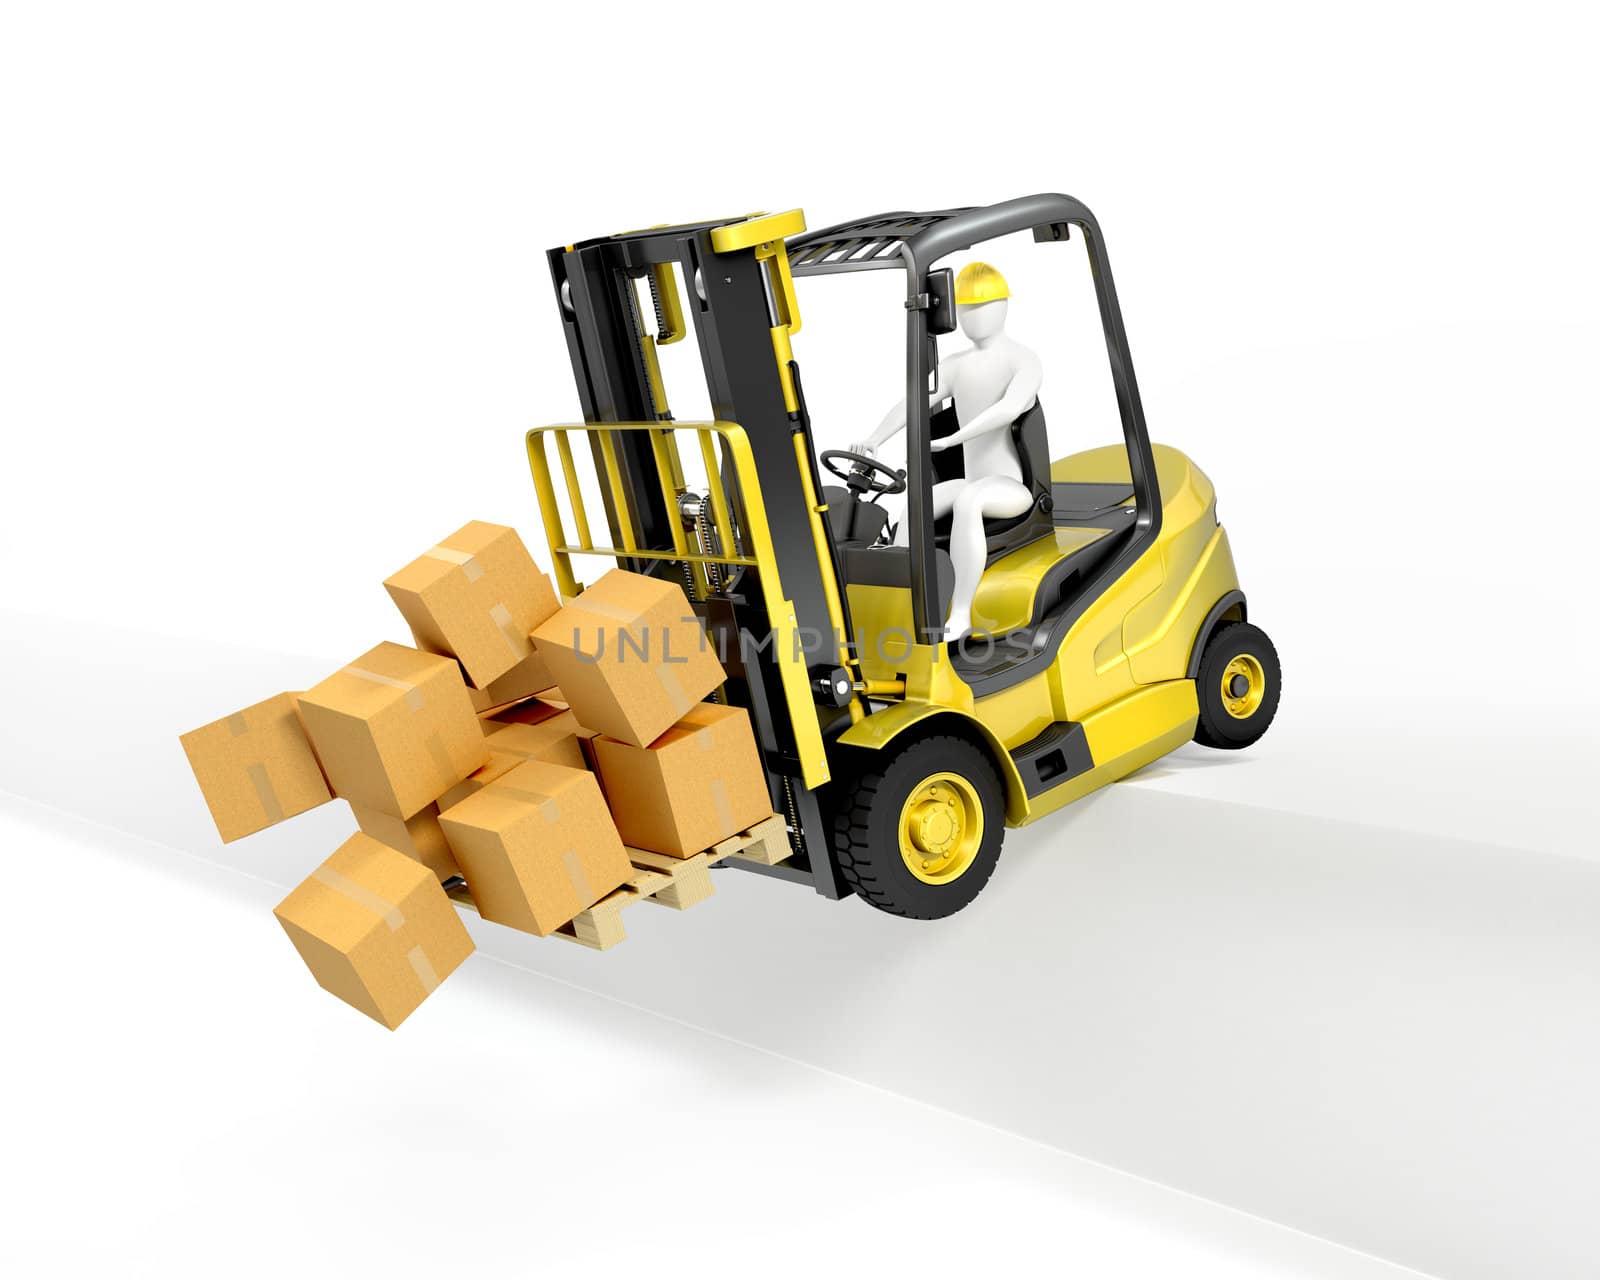 Fork lift truck falling from loading dock, isolated on white background